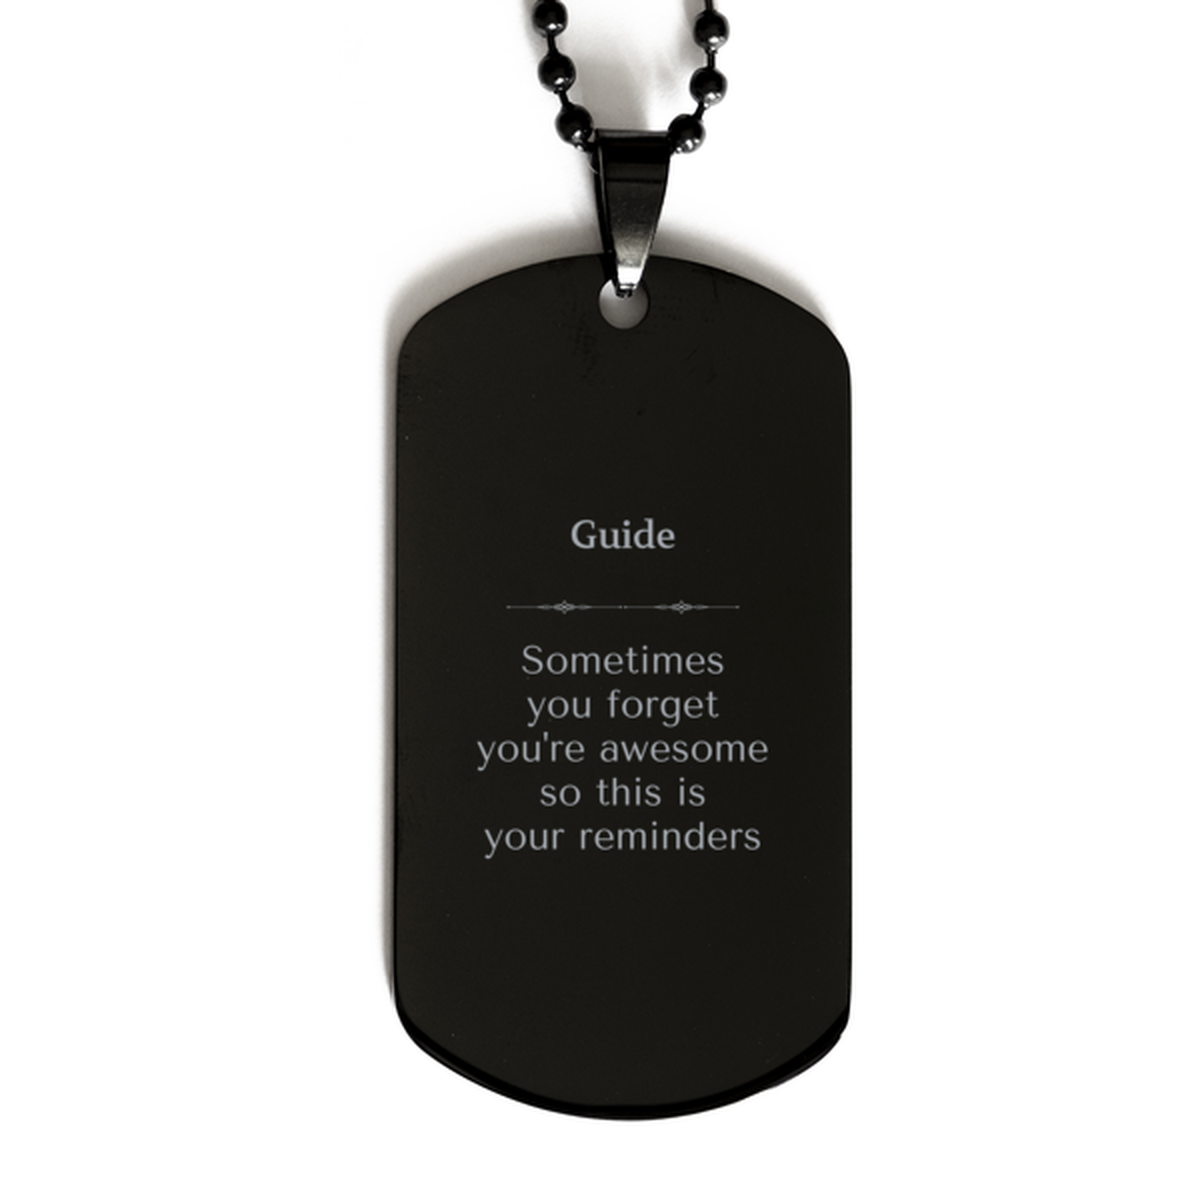 Sentimental Guide Black Dog Tag, Guide Sometimes you forget you're awesome so this is your reminders, Graduation Christmas Birthday Gifts for Guide, Men, Women, Coworkers